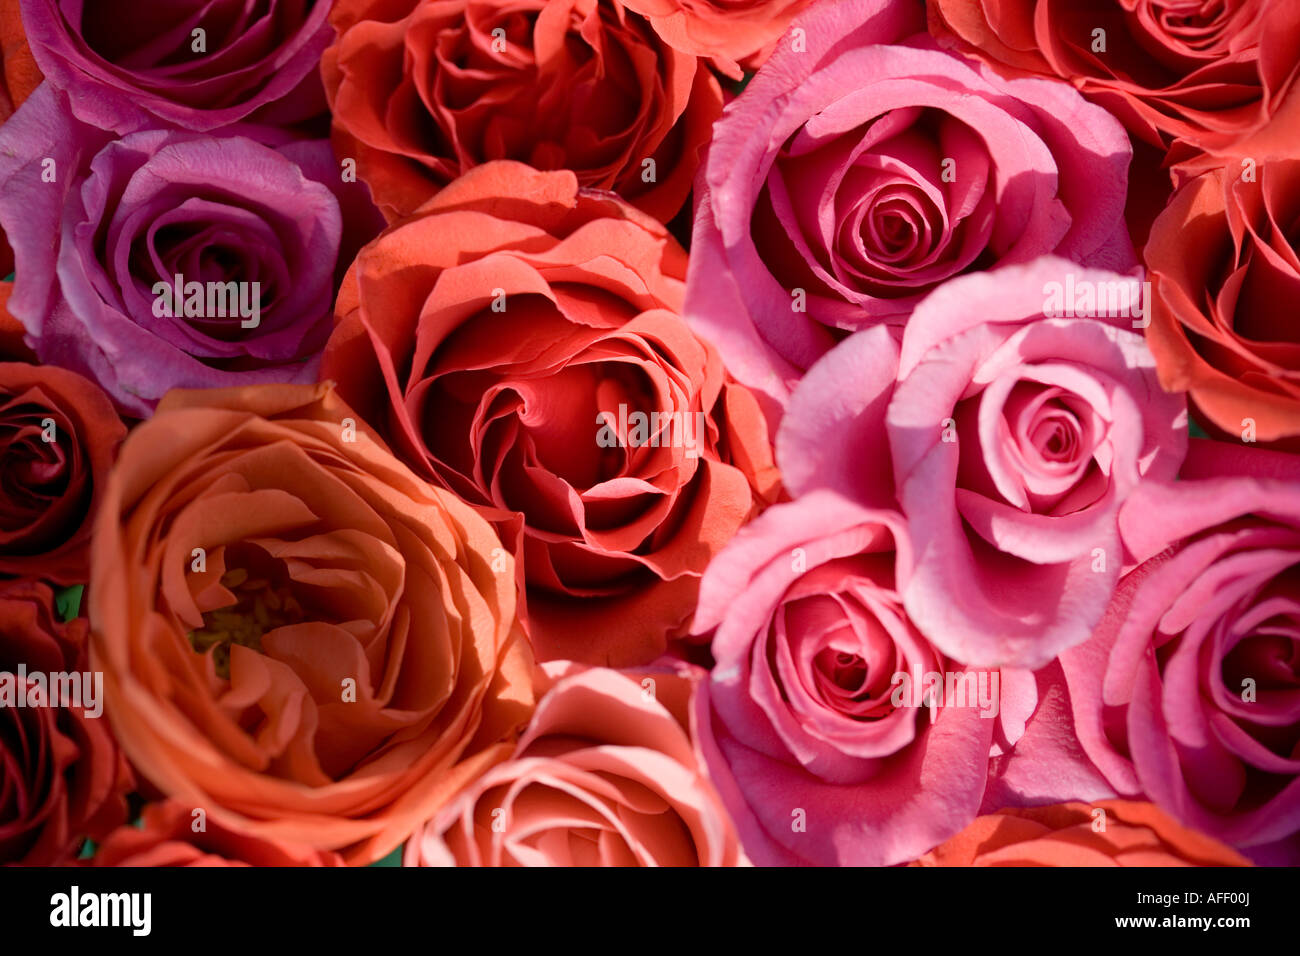 Bouquet of orange pink and red roses shot from above Stock Photo